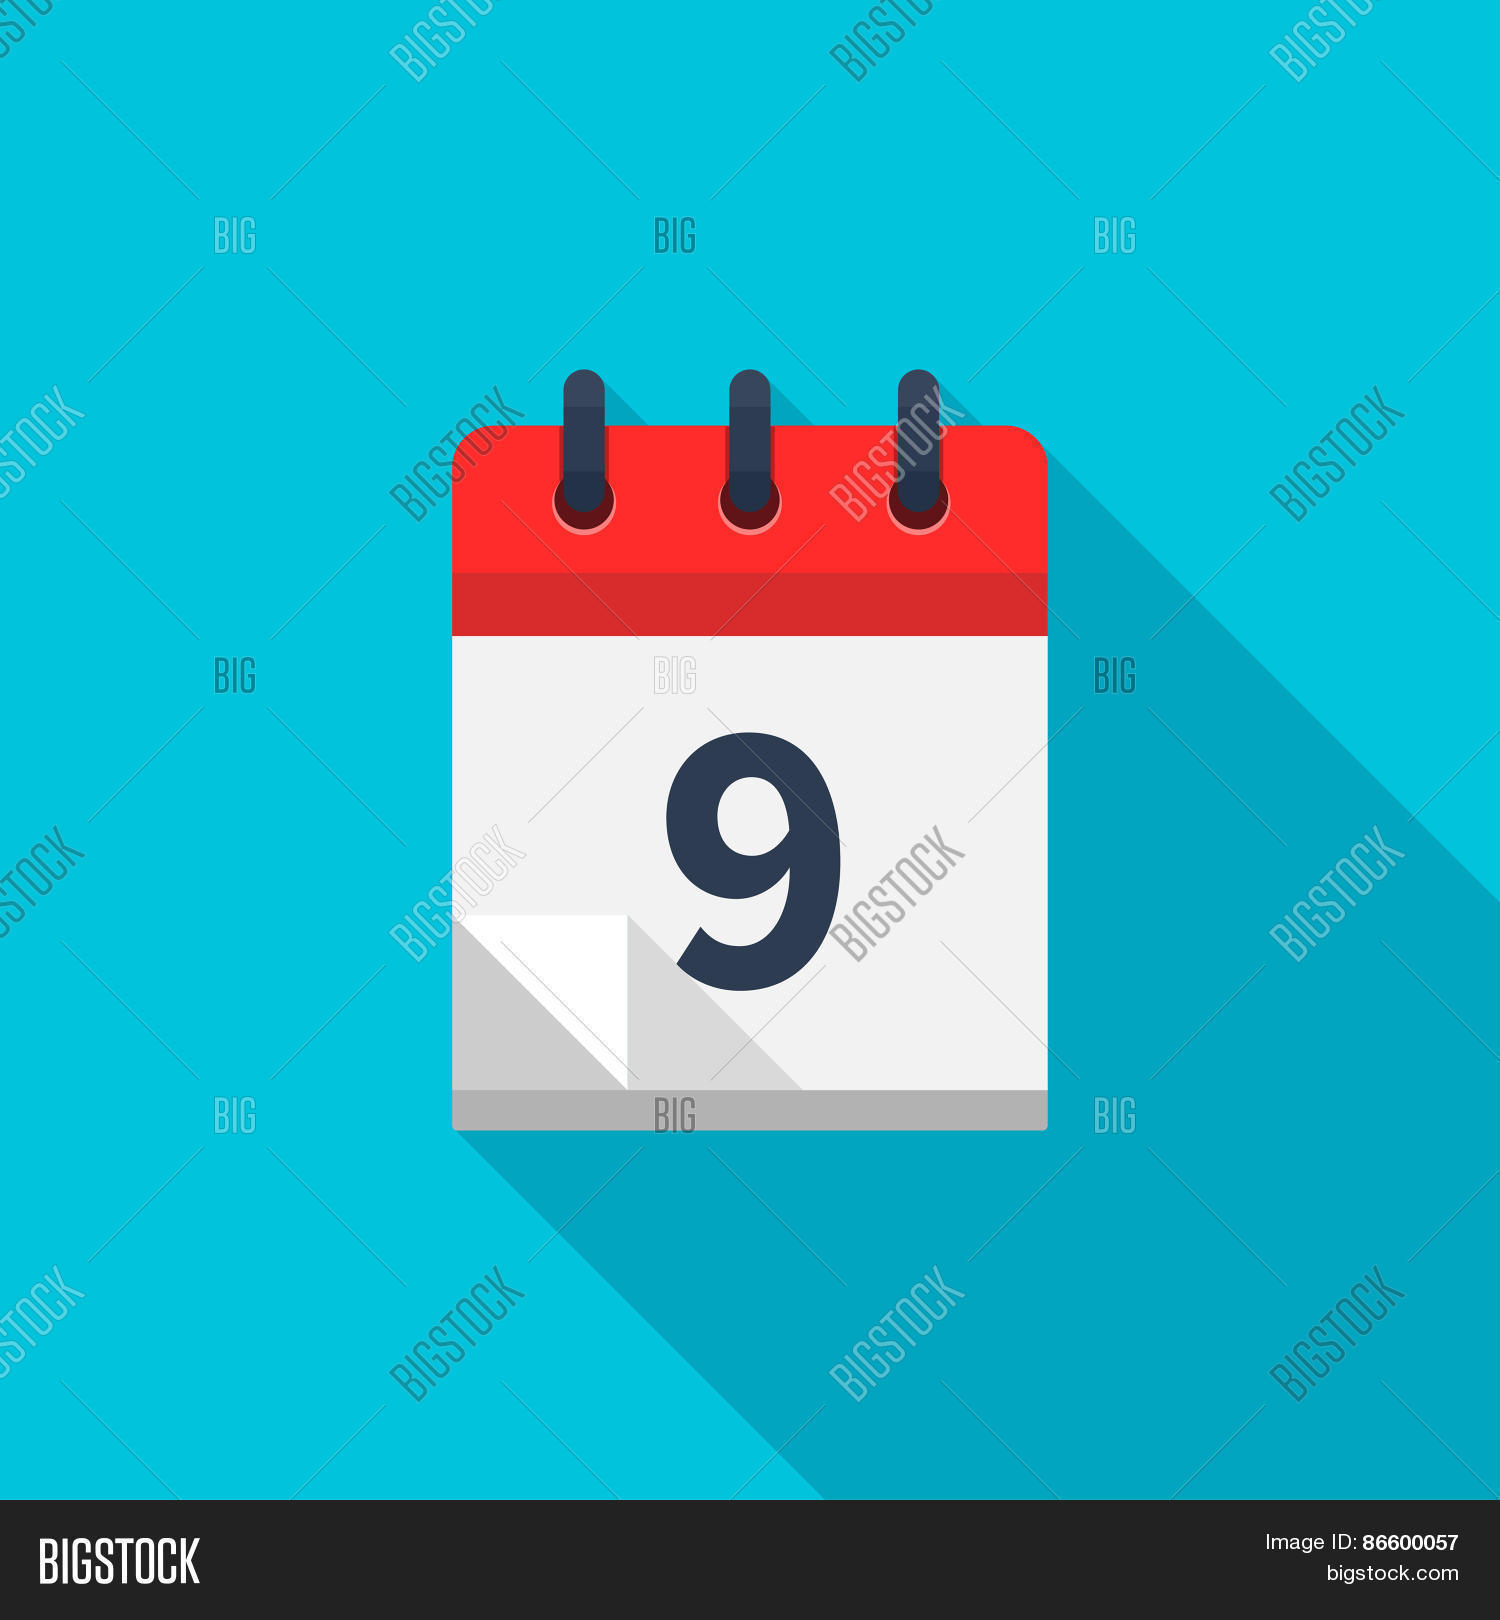 Flat Calendar Icon. Date Time Vector &amp; Photo | Bigstock throughout Time And Date Calendar